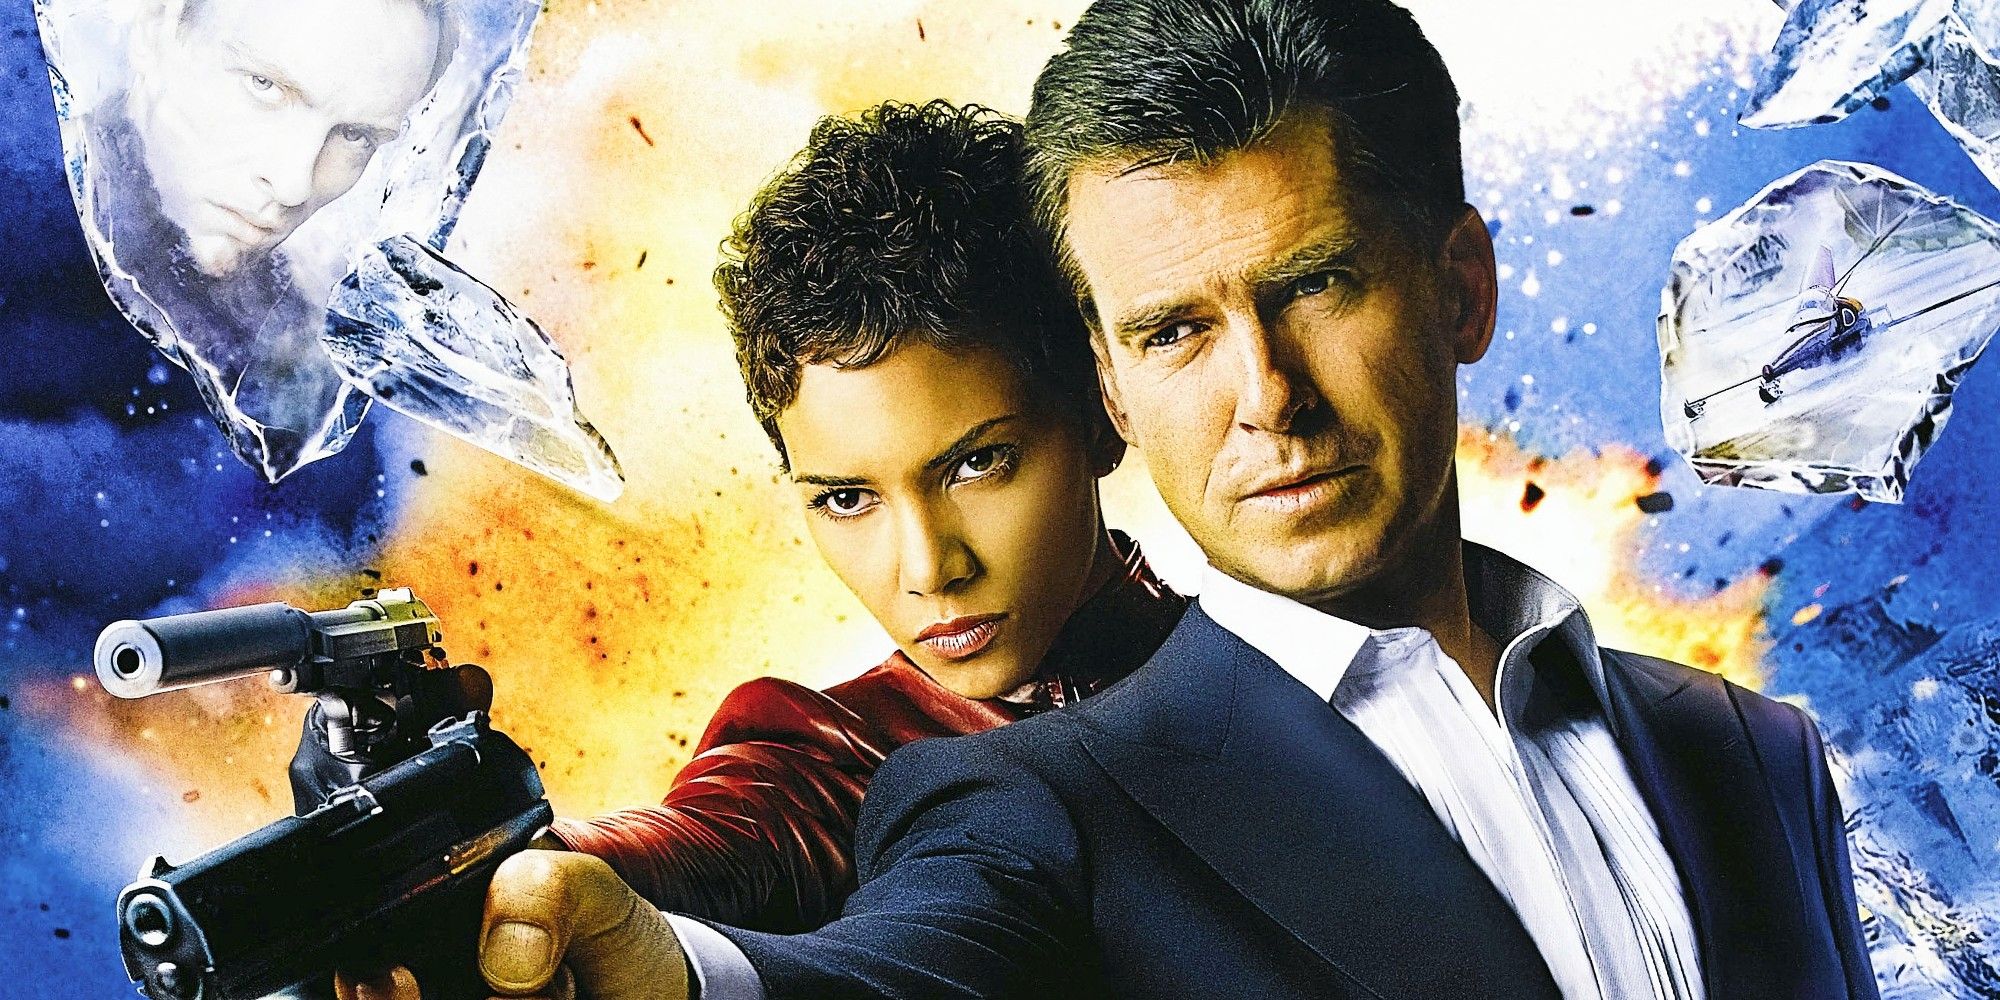 Pierce Brosnan and Halle Berry co-star in Die Another Day, Brosnan's final bow as 007